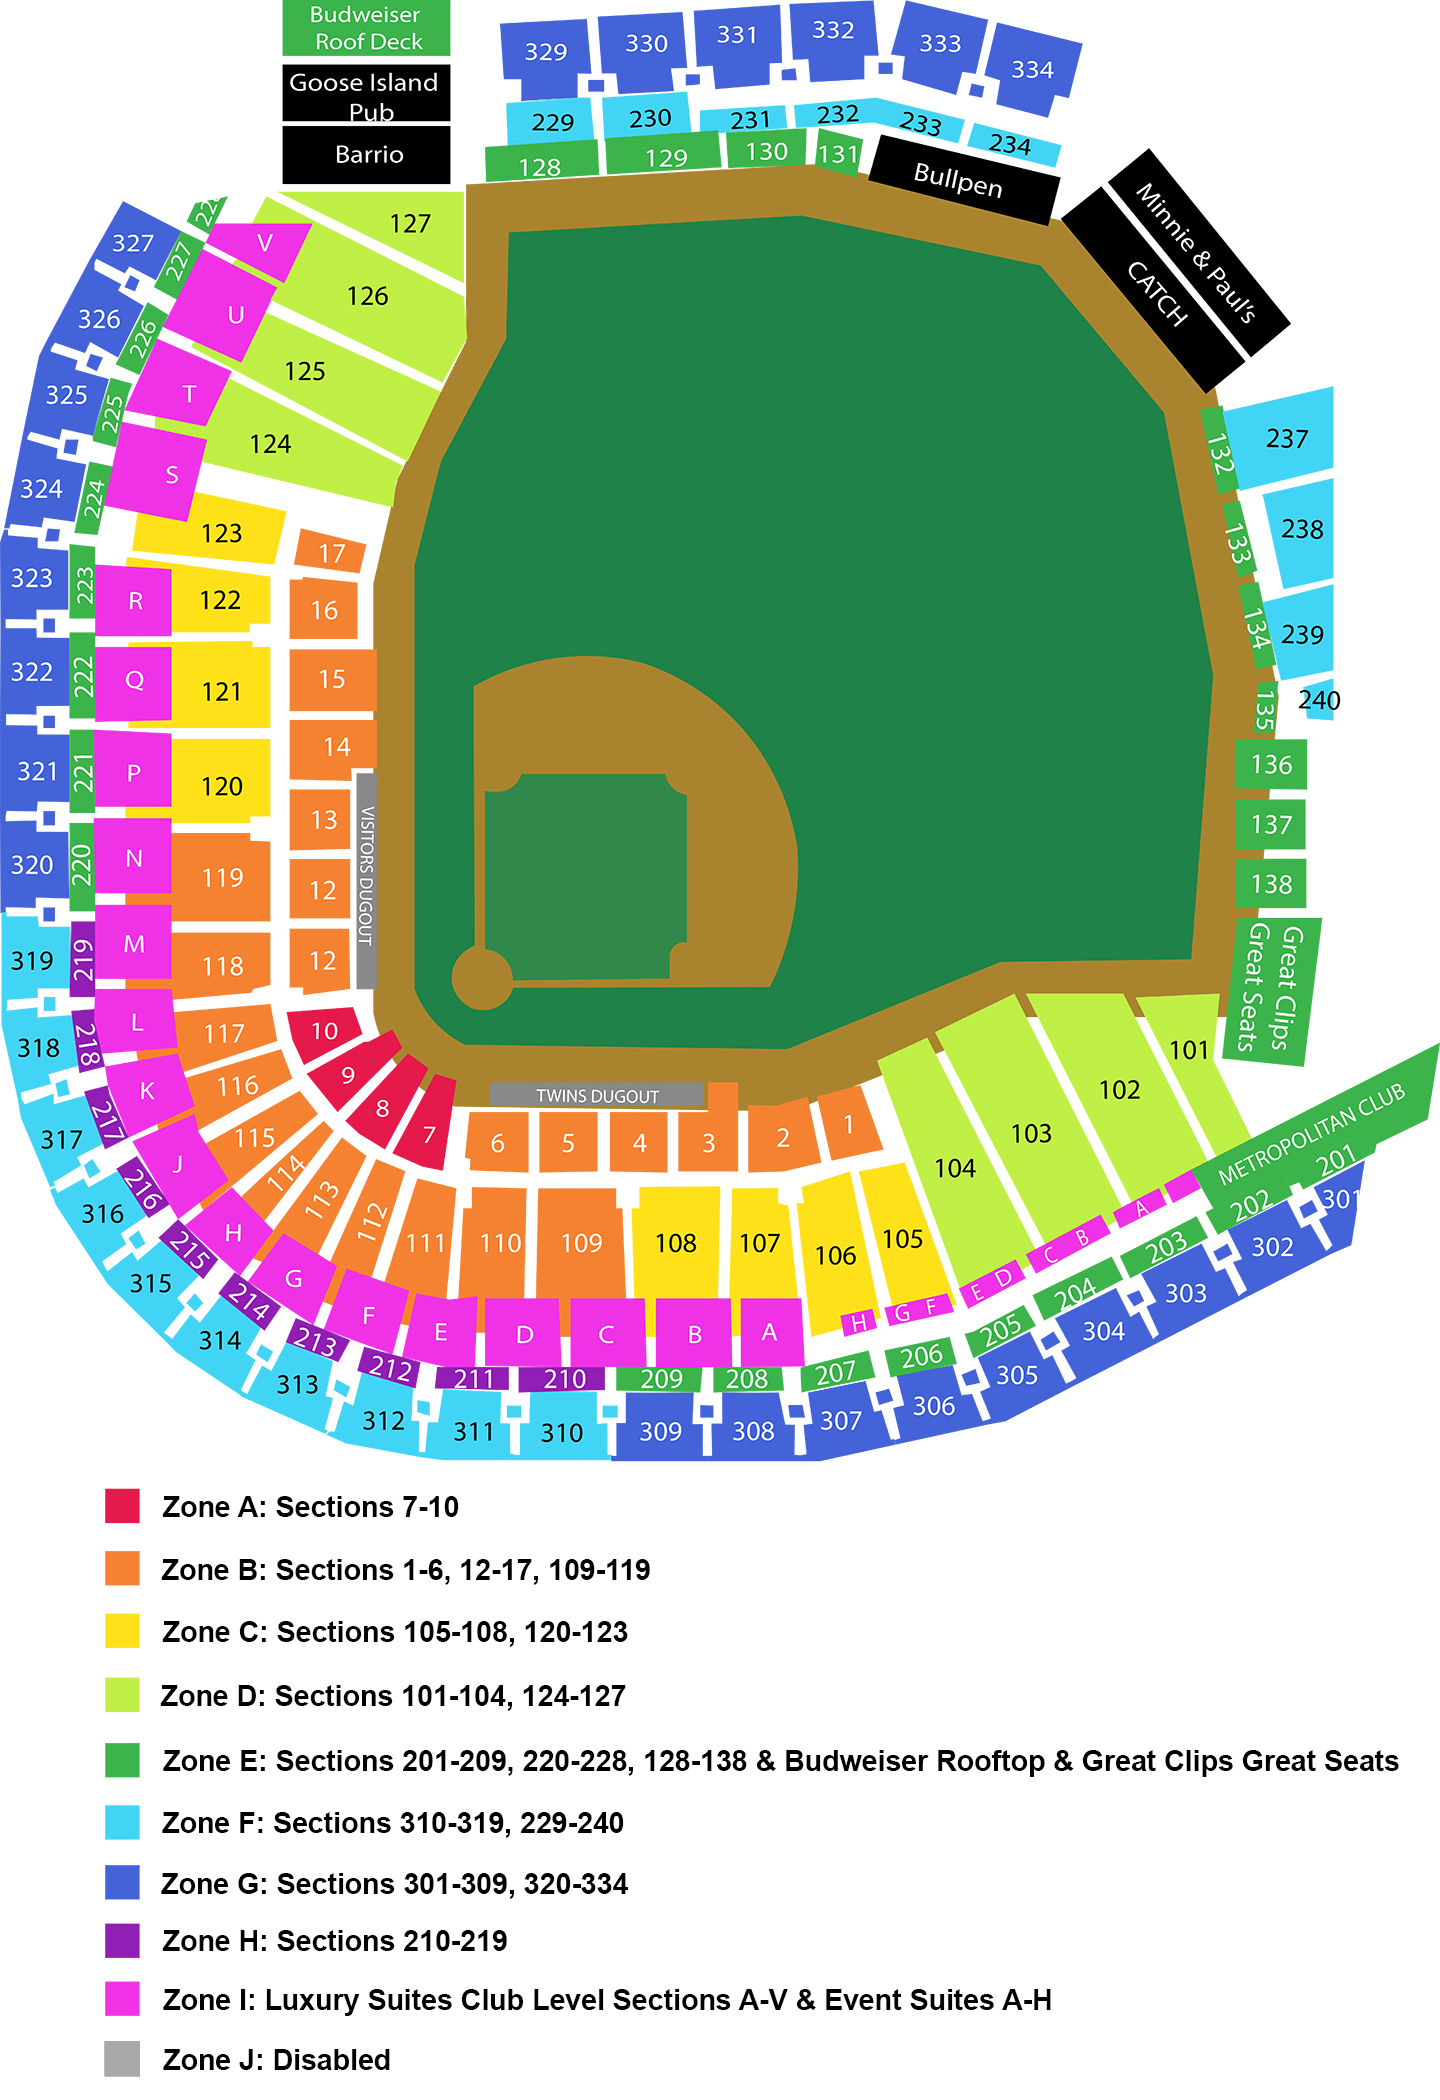 St. Louis Cardinals at Miami Marlins - HungryTickets